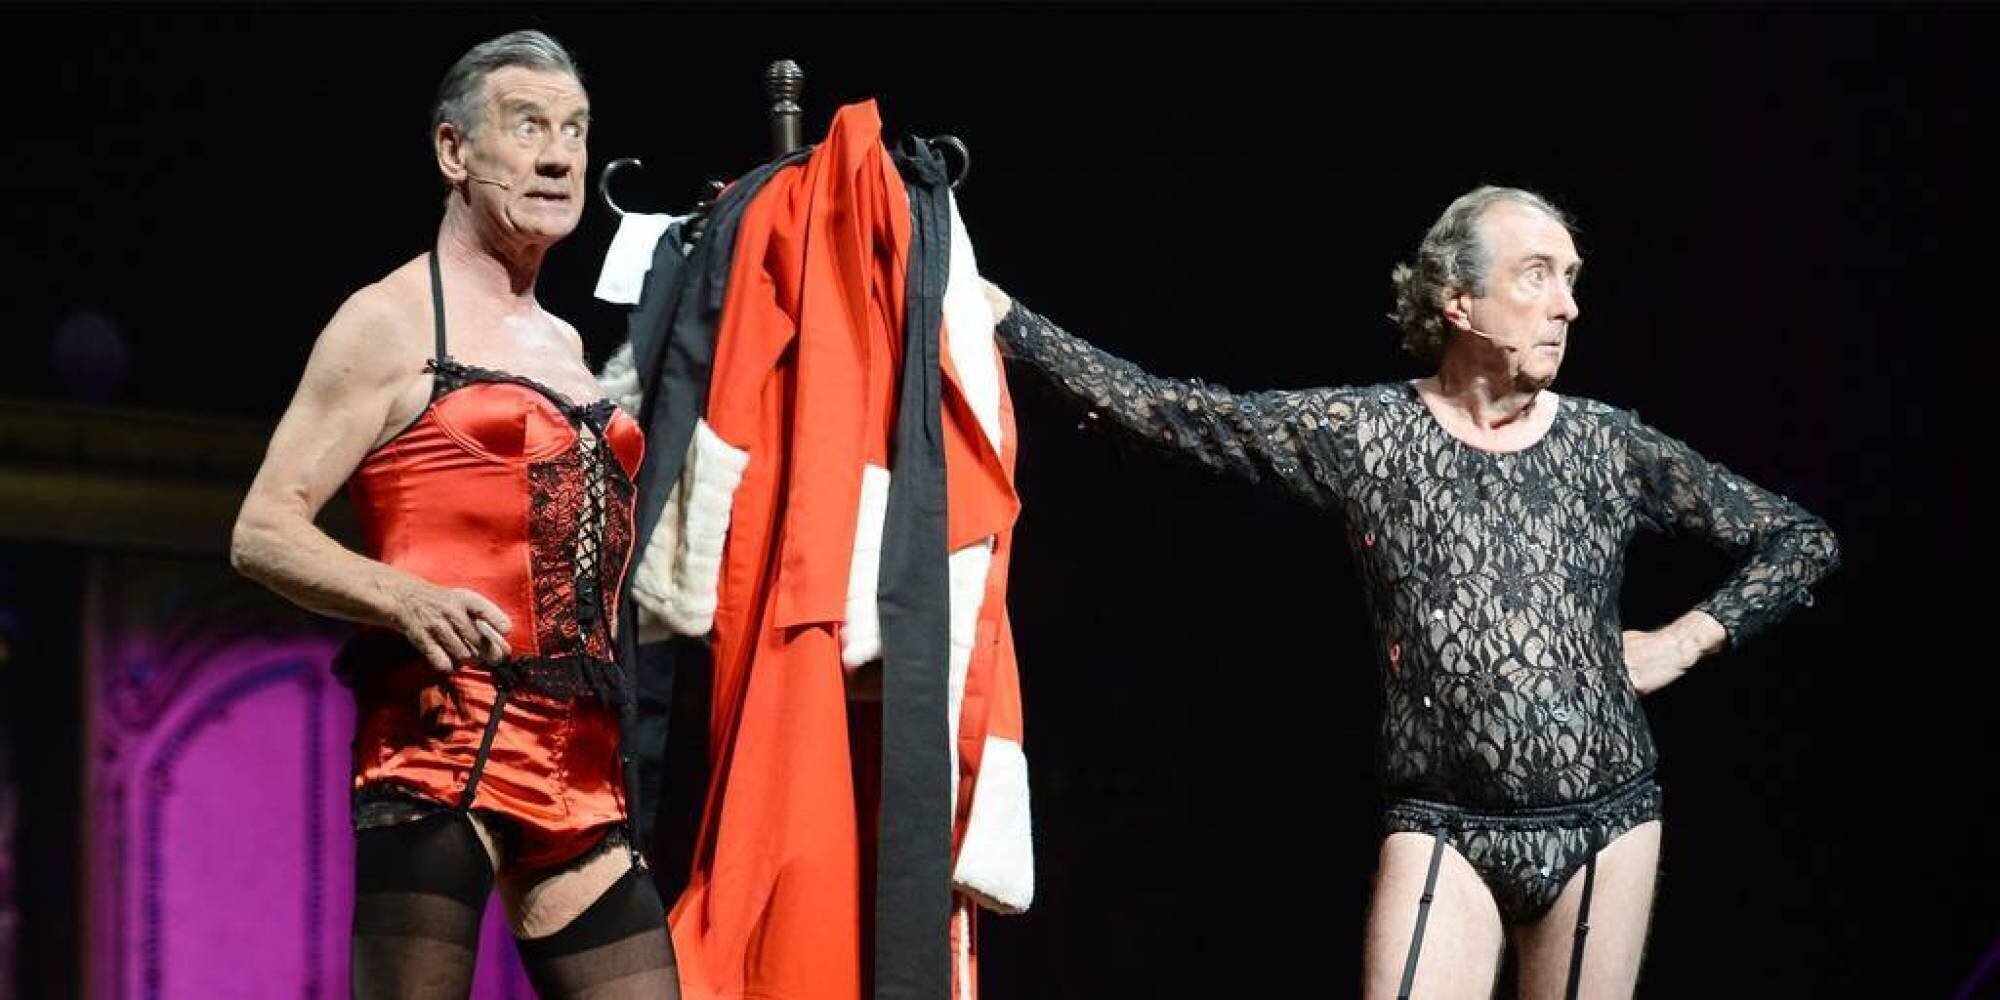 Monty Python Almost Live Review Critics Divided Over Comedy Troupes First Night At O2 HuffPost UK Entertainment